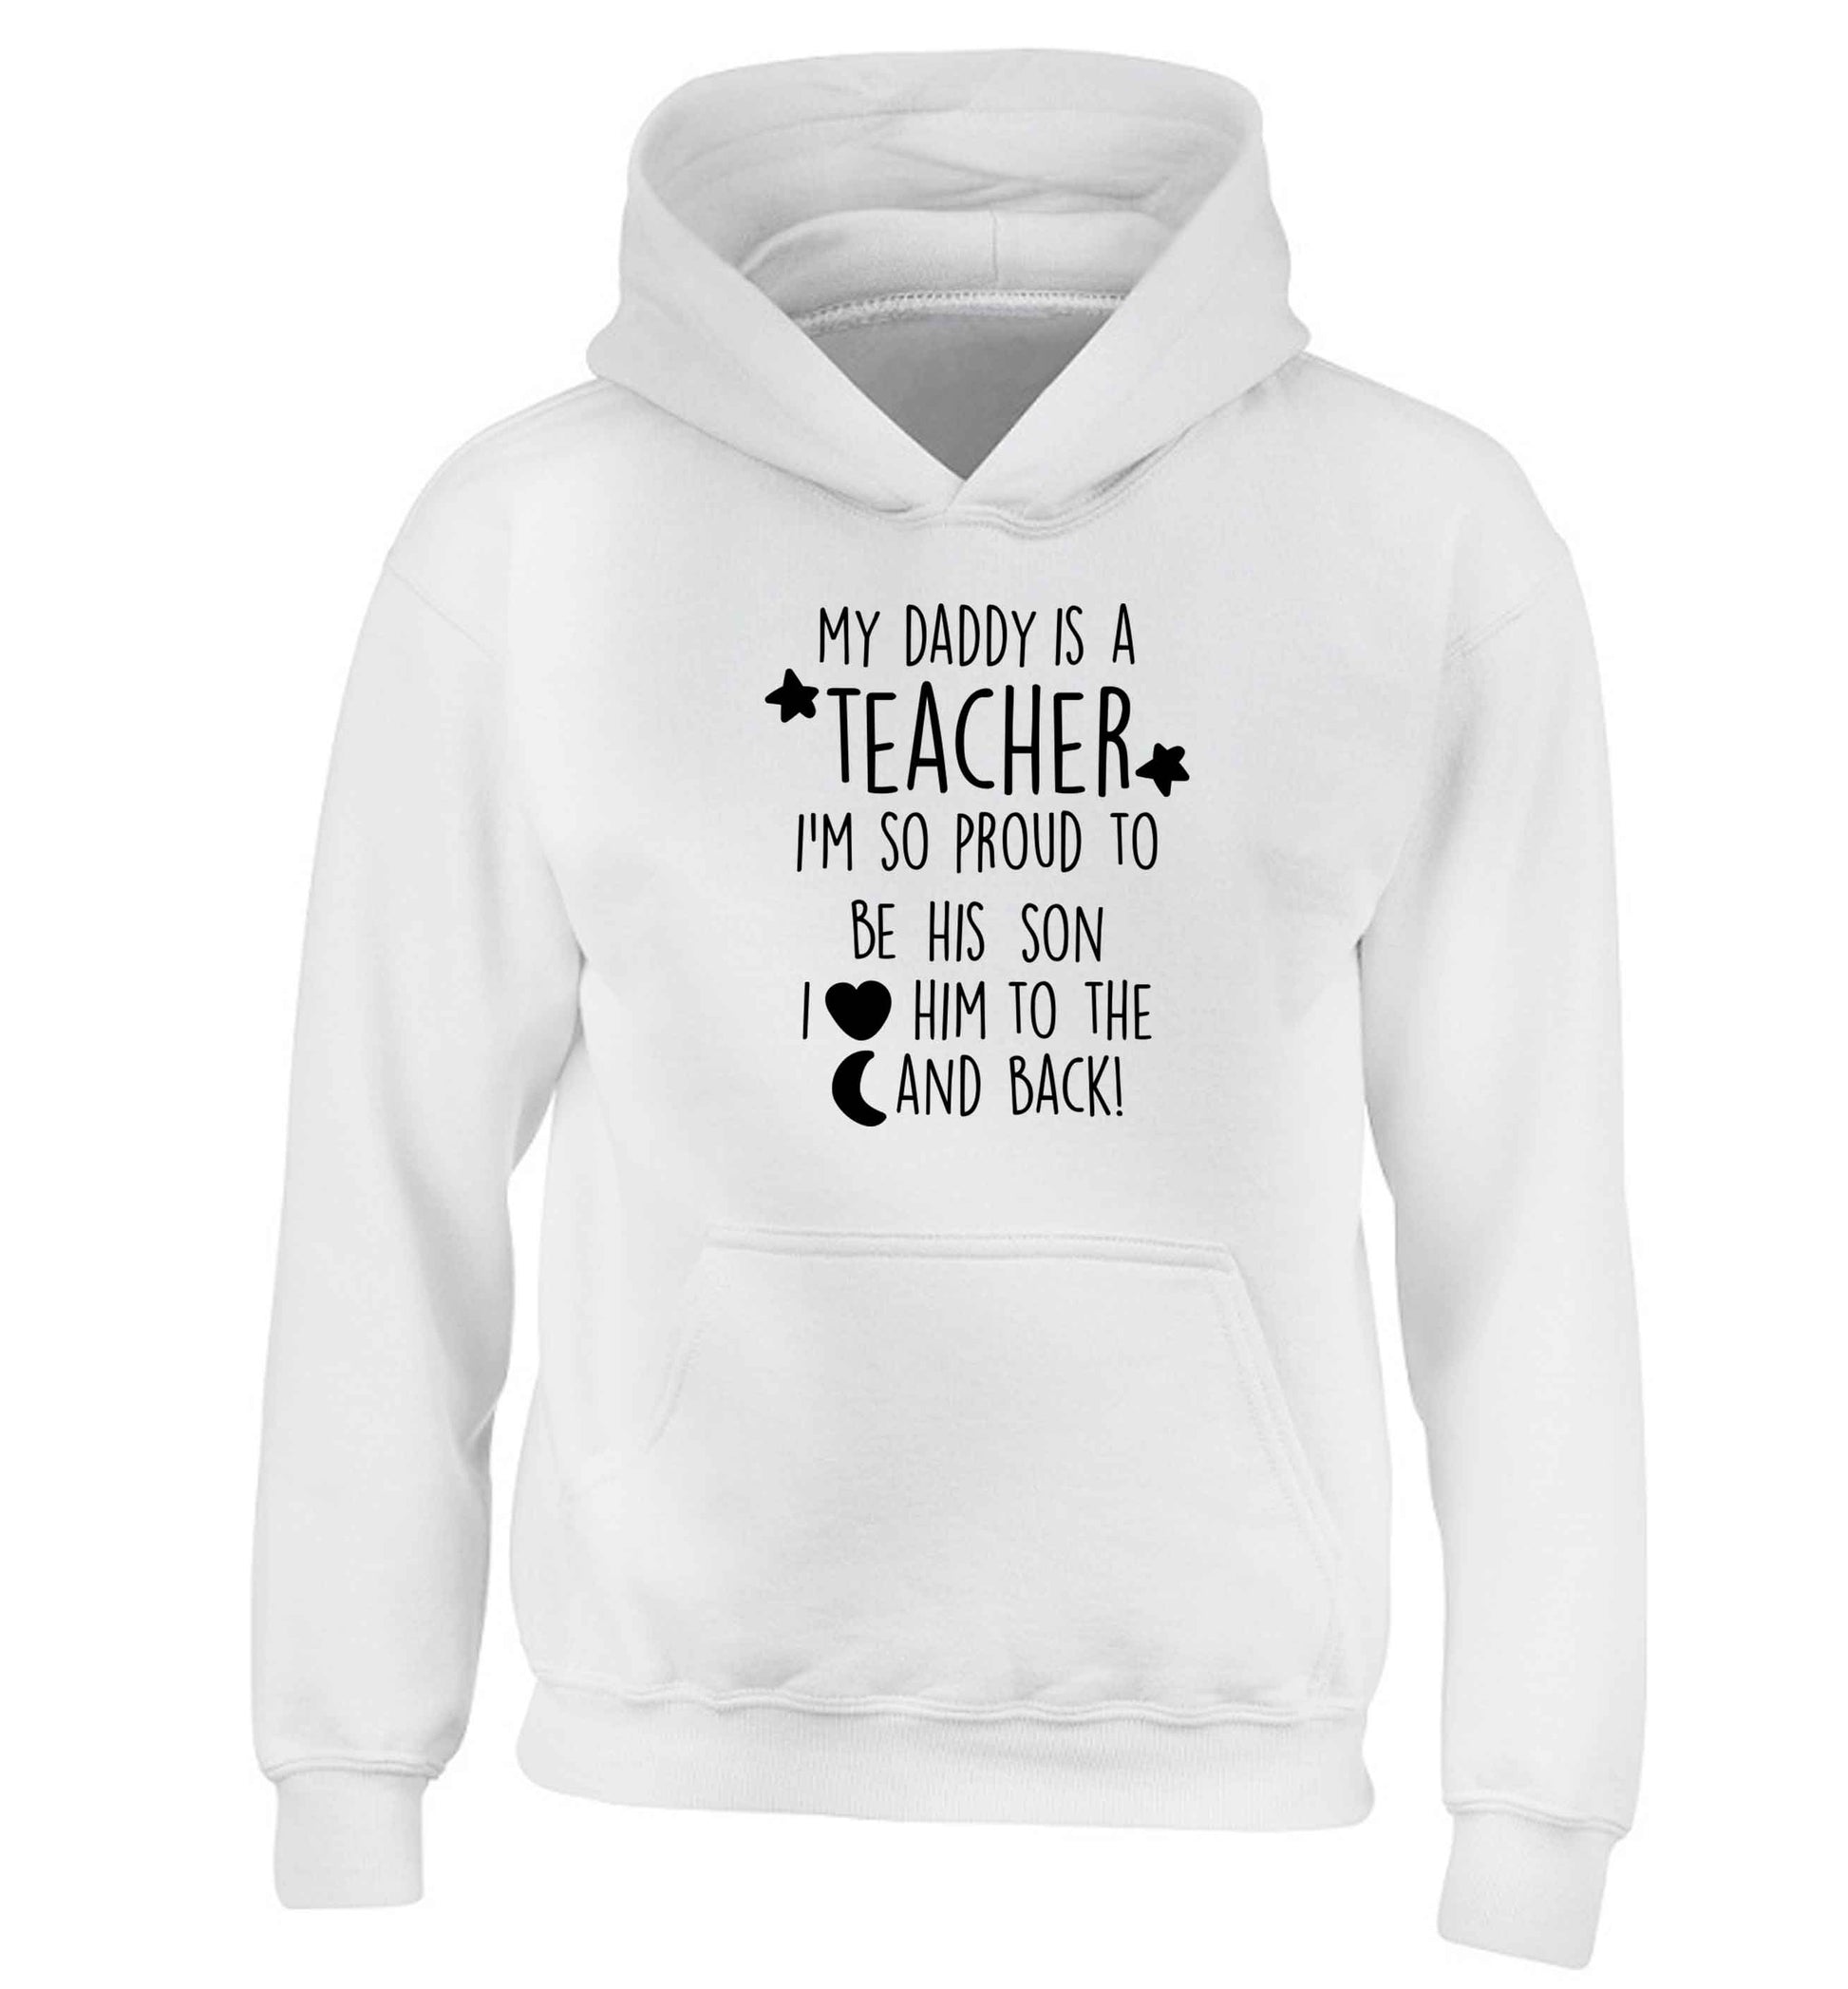 My daddy is a teacher I'm so proud to be his son I love her to the moon and back children's white hoodie 12-13 Years